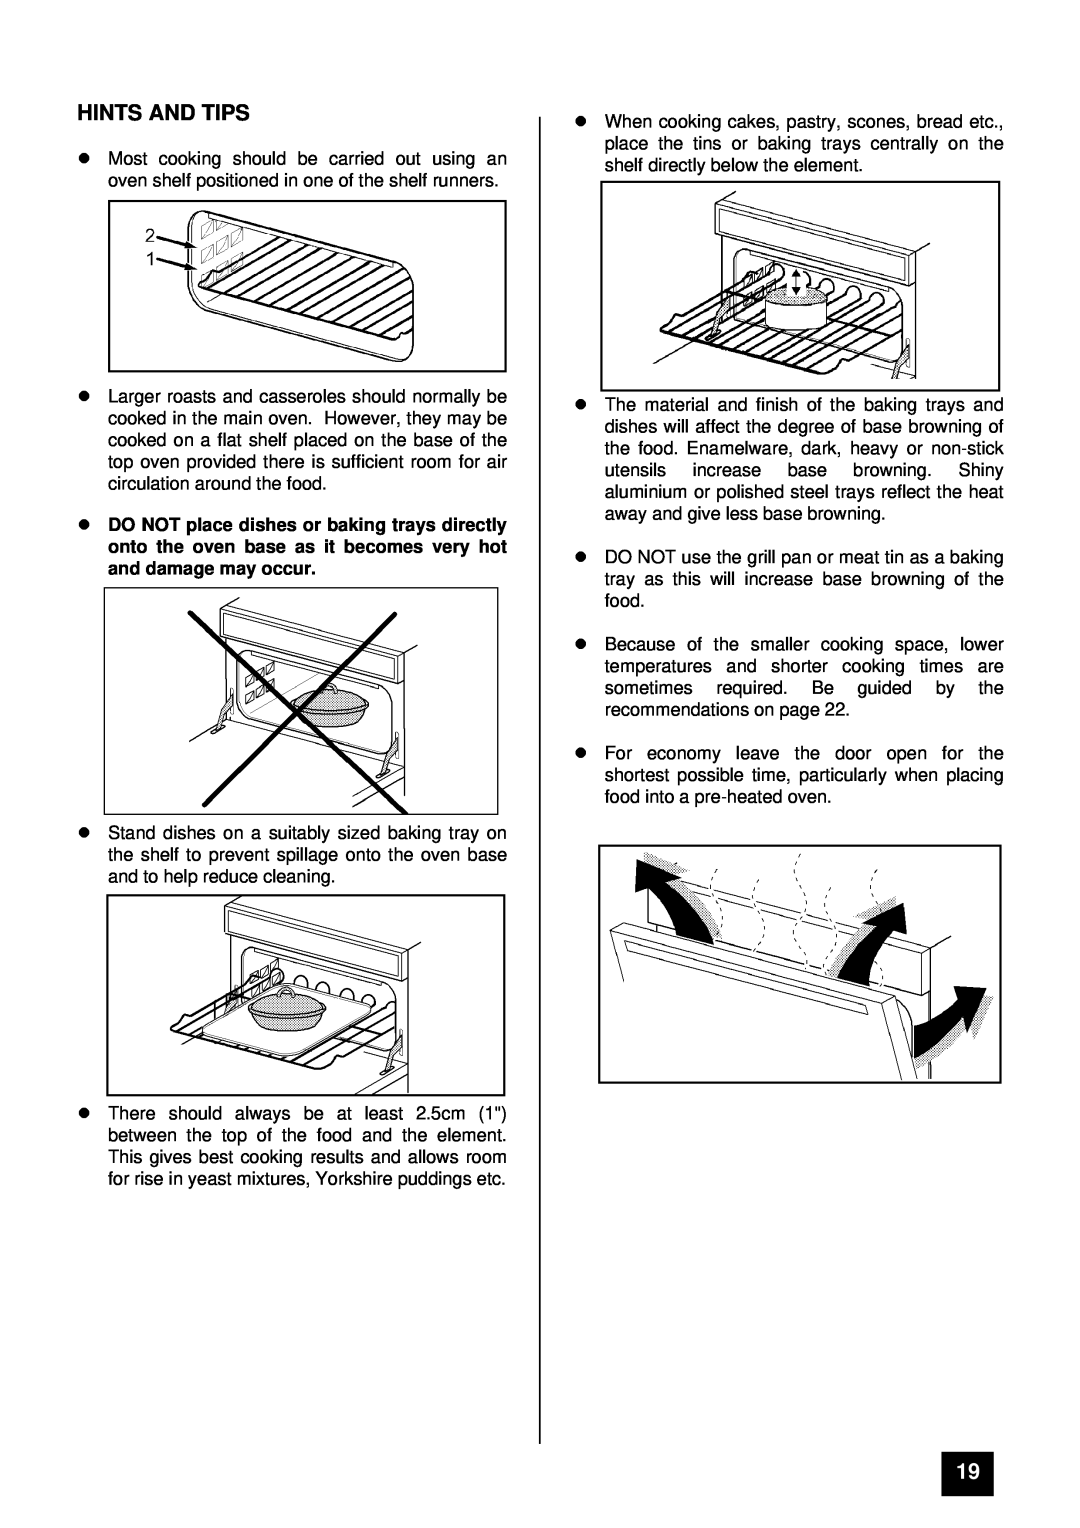 Zanussi ZCE ID manual lHINTS AND TIPS, land damage may occur 